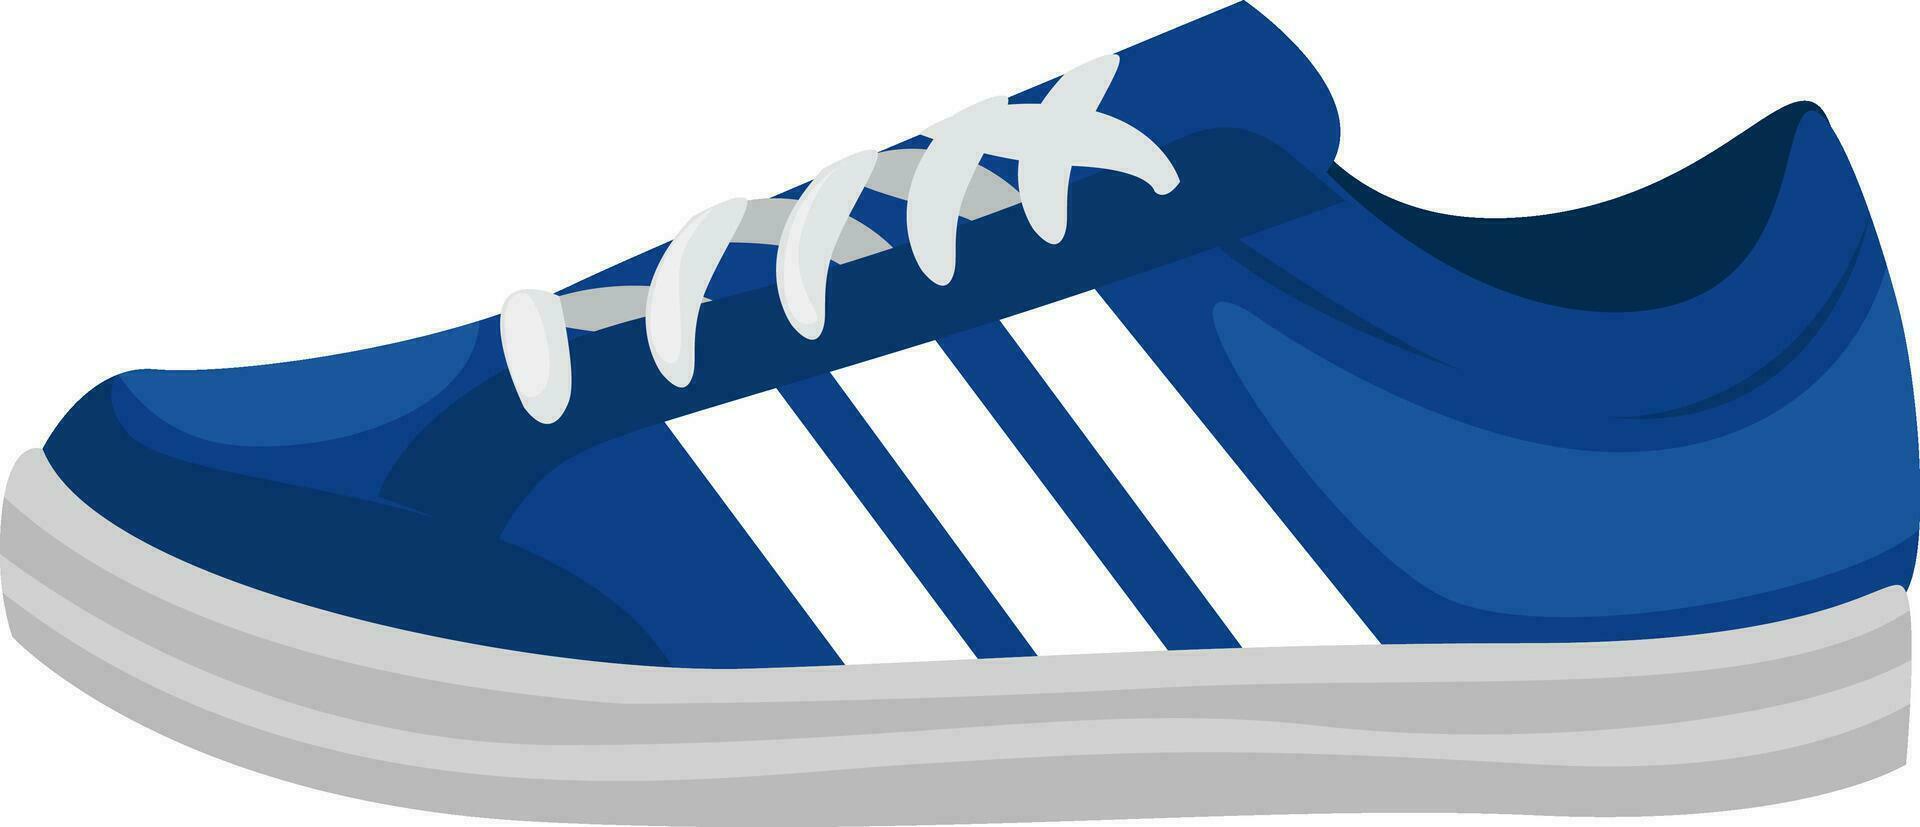 Blue sneakers, illustration, vector on white background